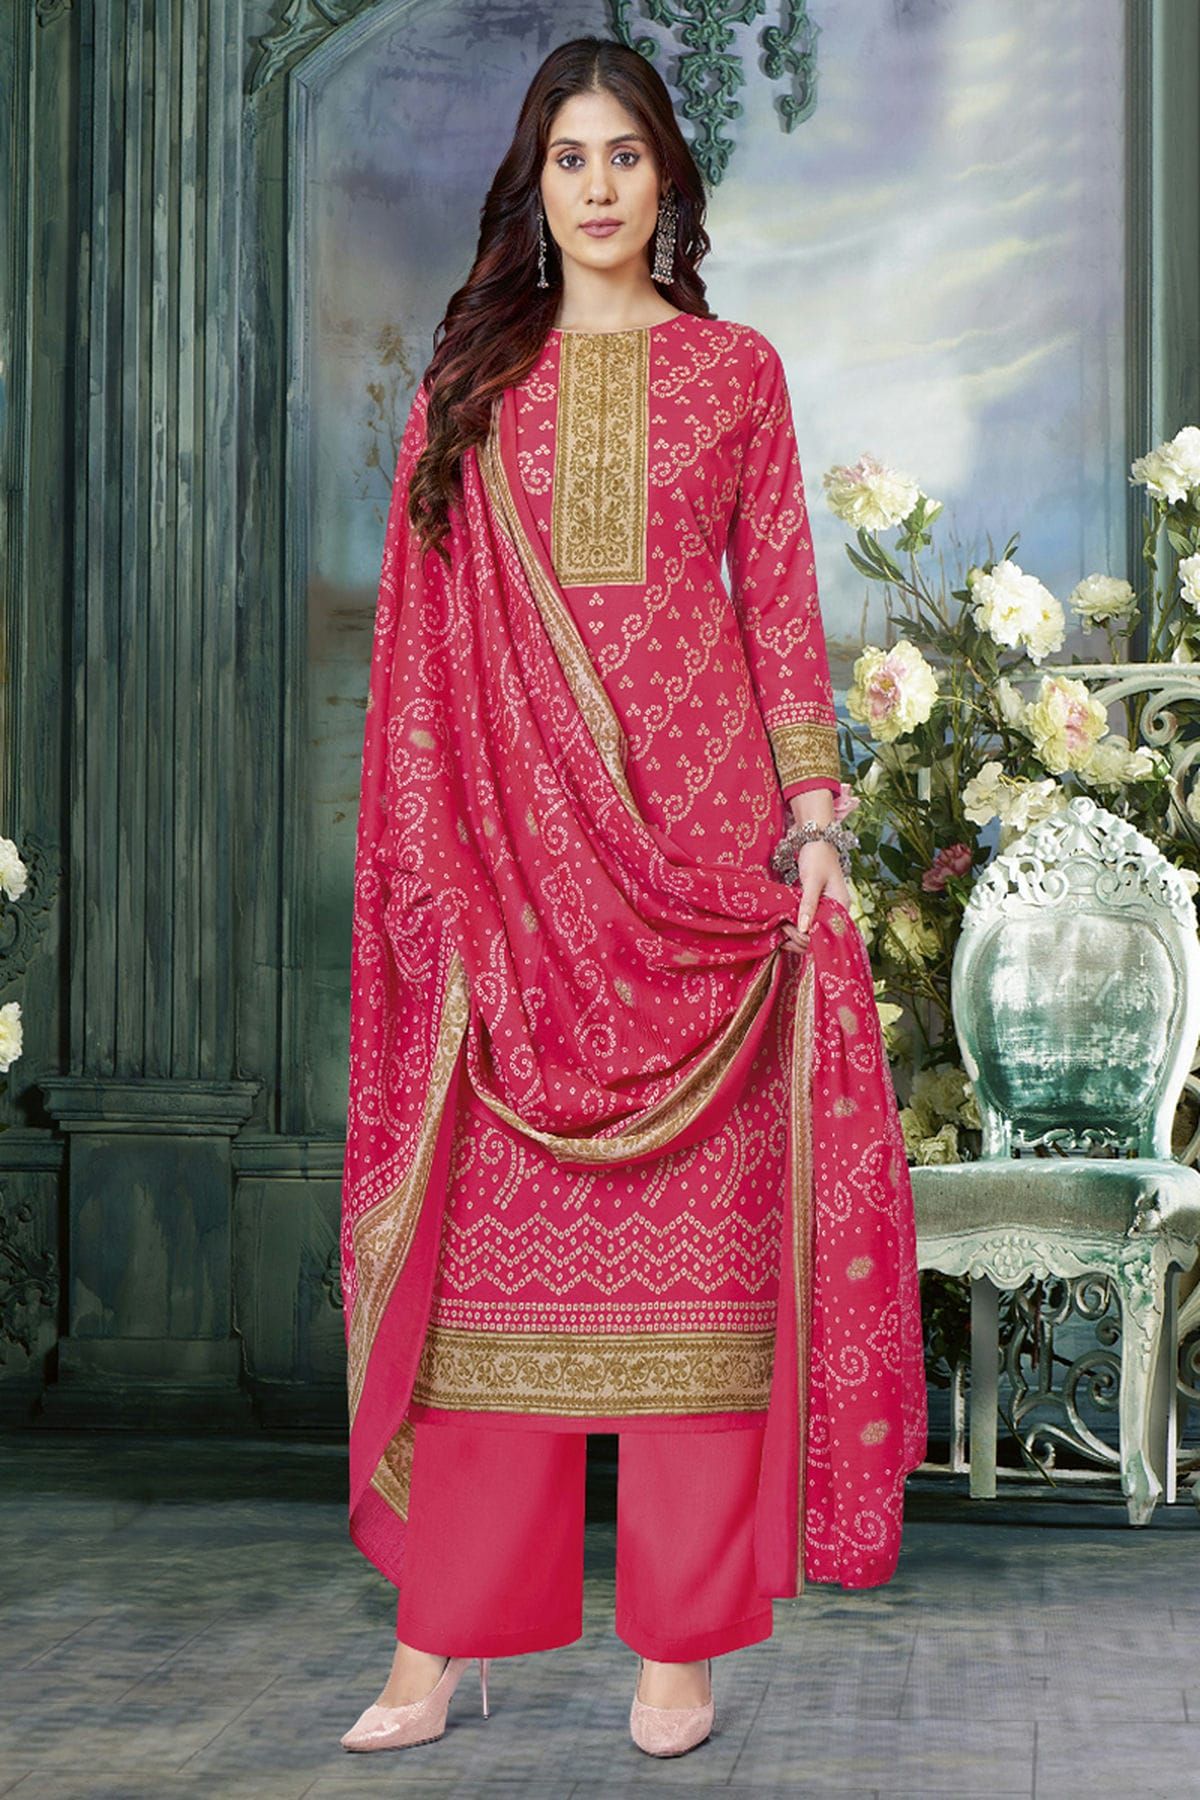 Cotton Bandhej Suits - Manufacturers, Suppliers and Exporters